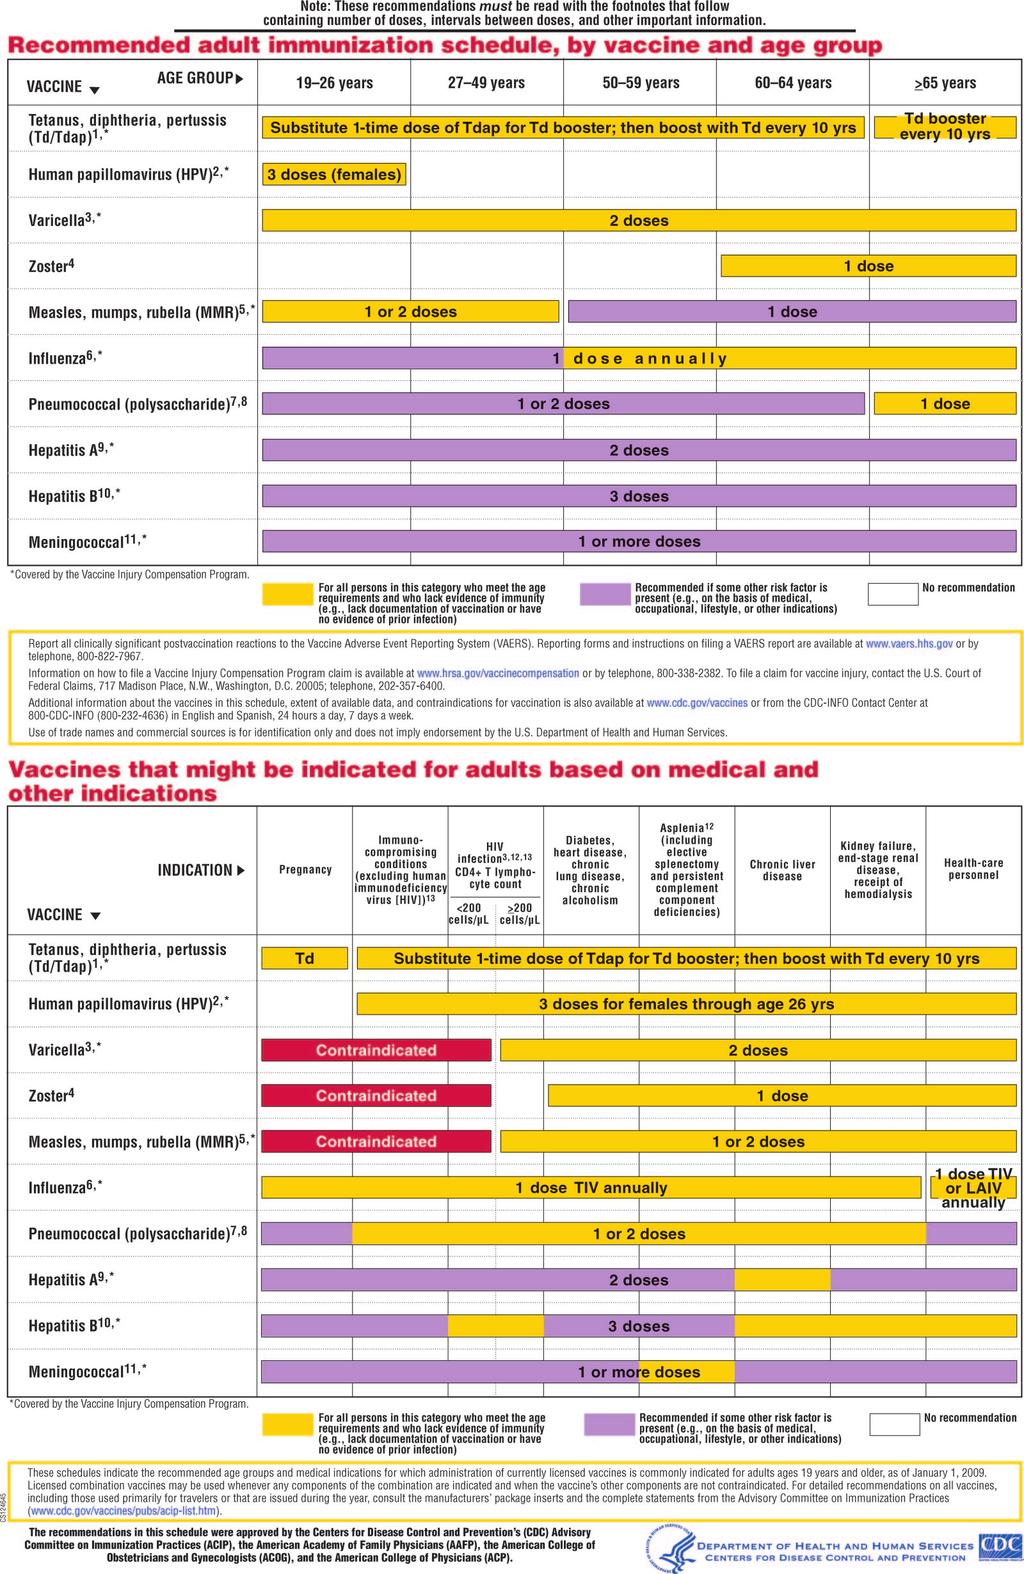 Recommended Adult Immunization Schedule: United States, 2010 Clinical Guidelines Figure.